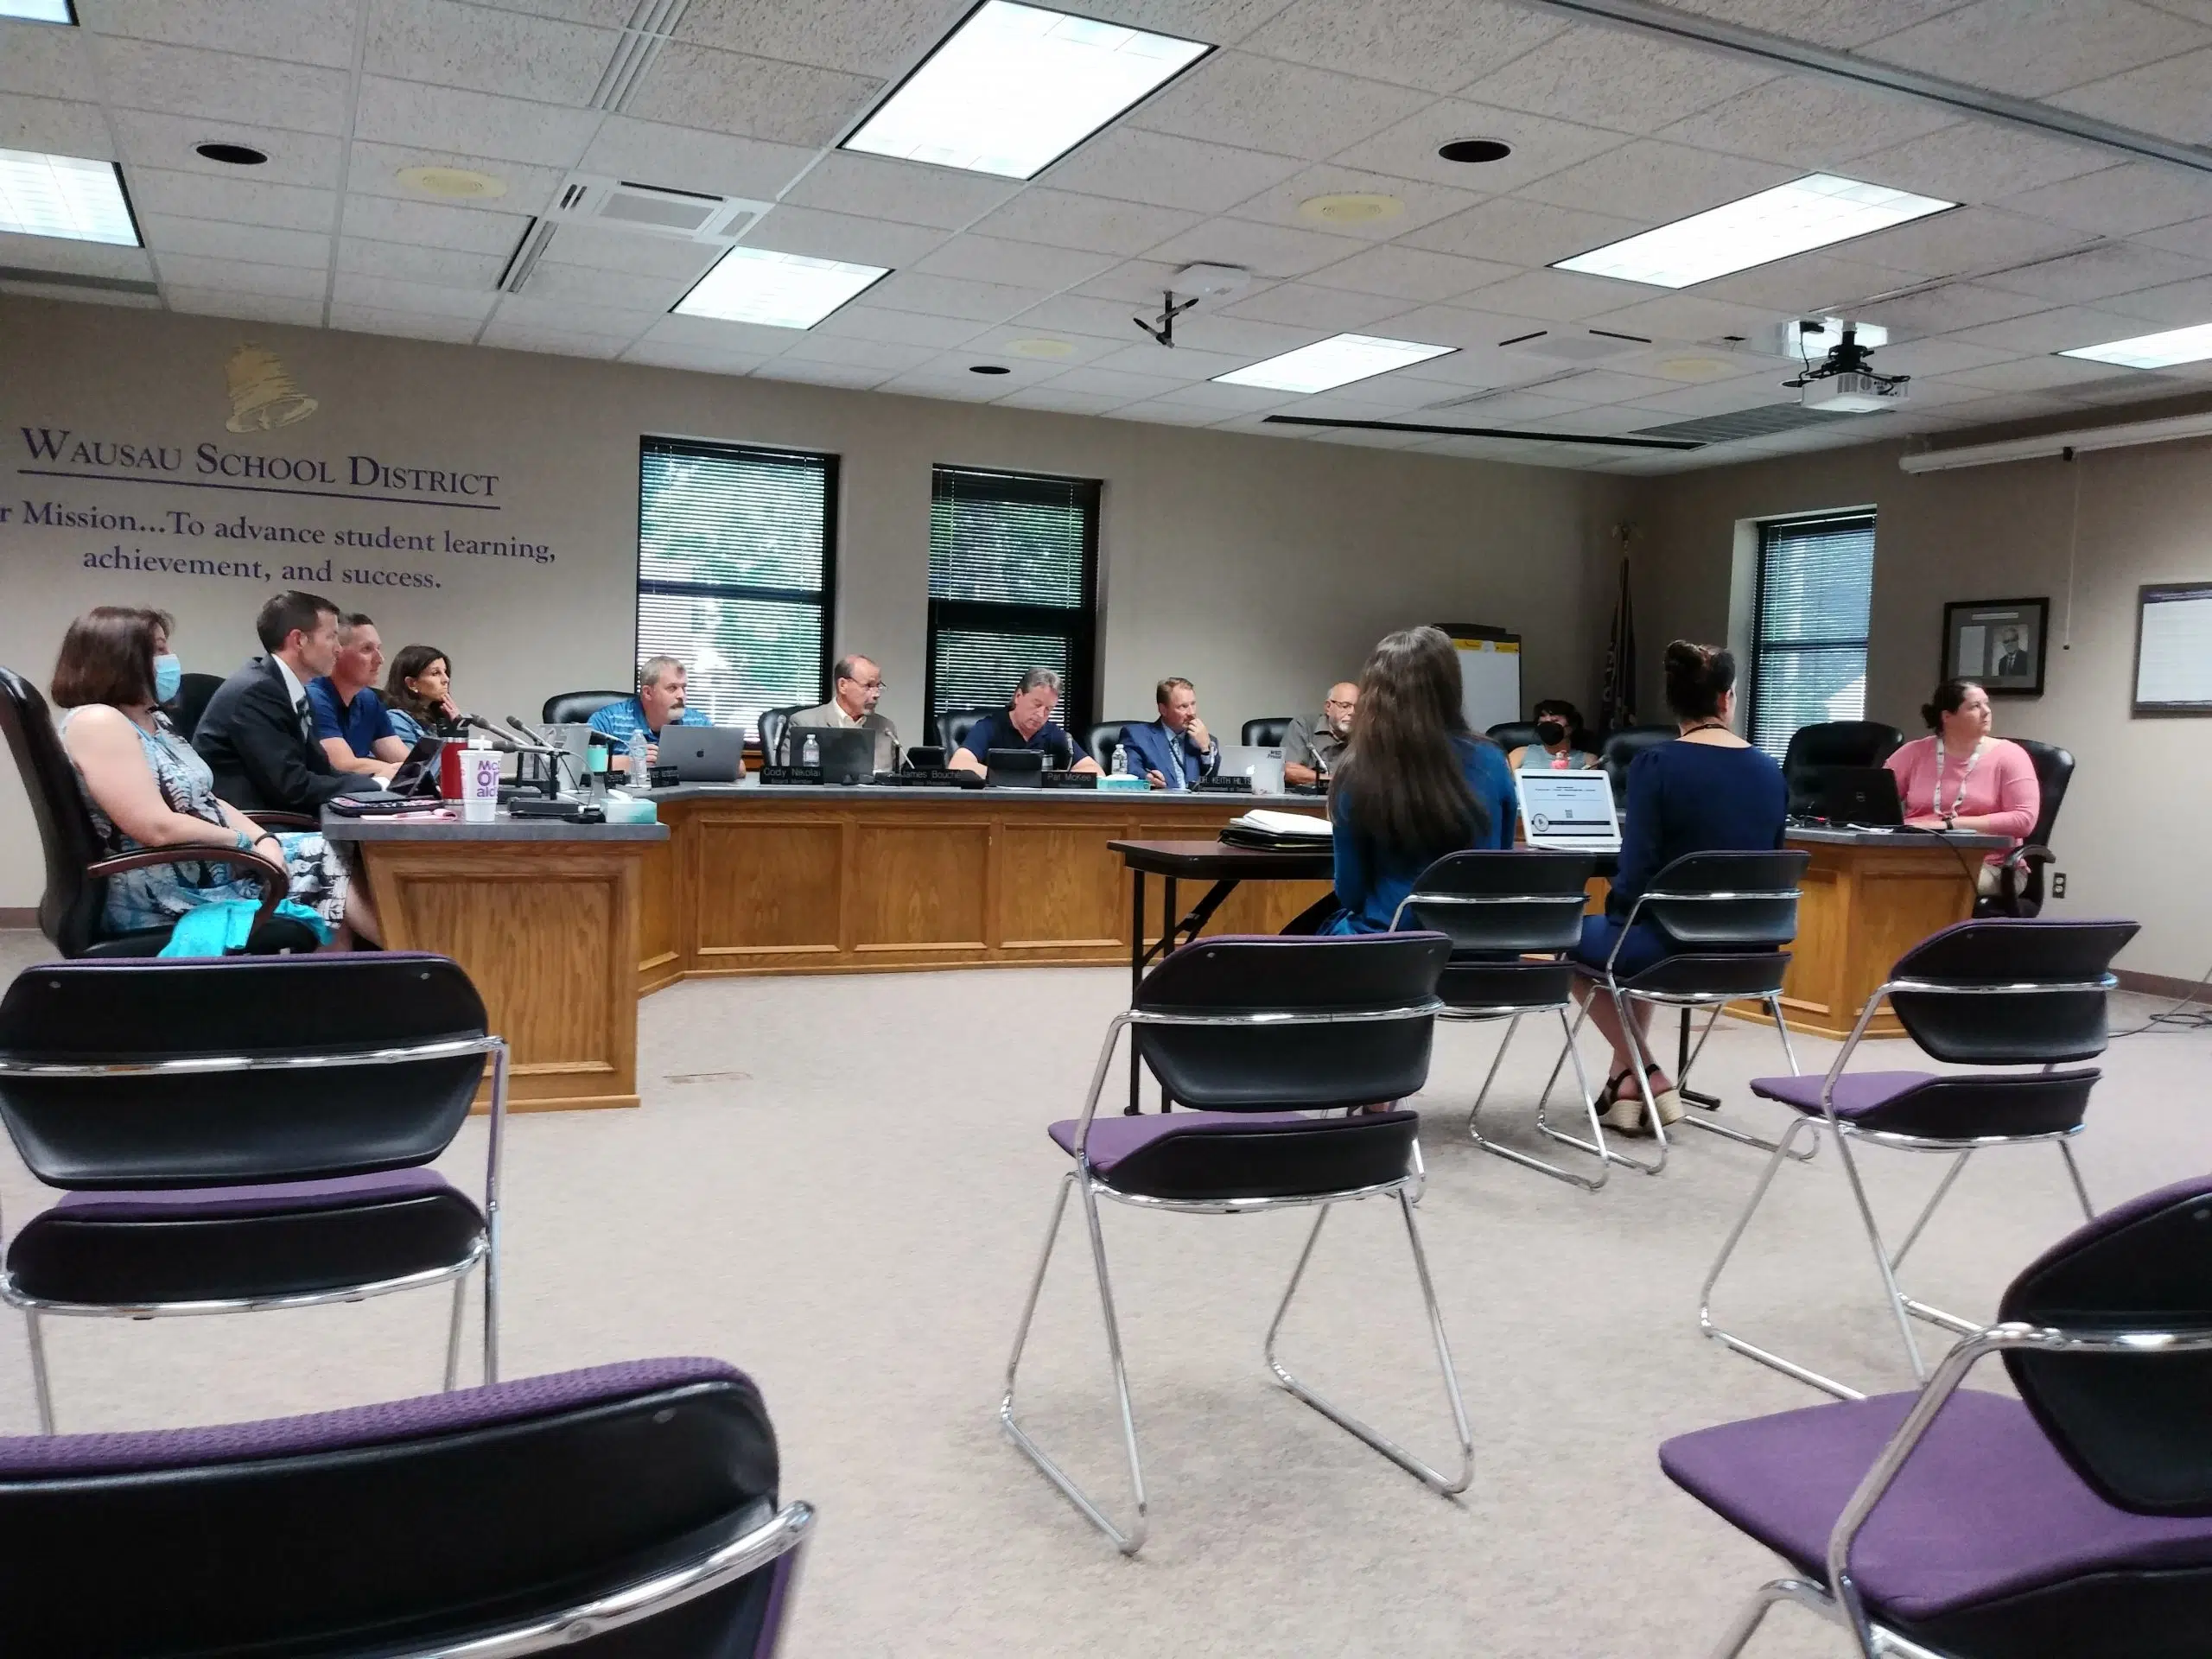 Referendum Vote Expected Today From Wausau Board of Education